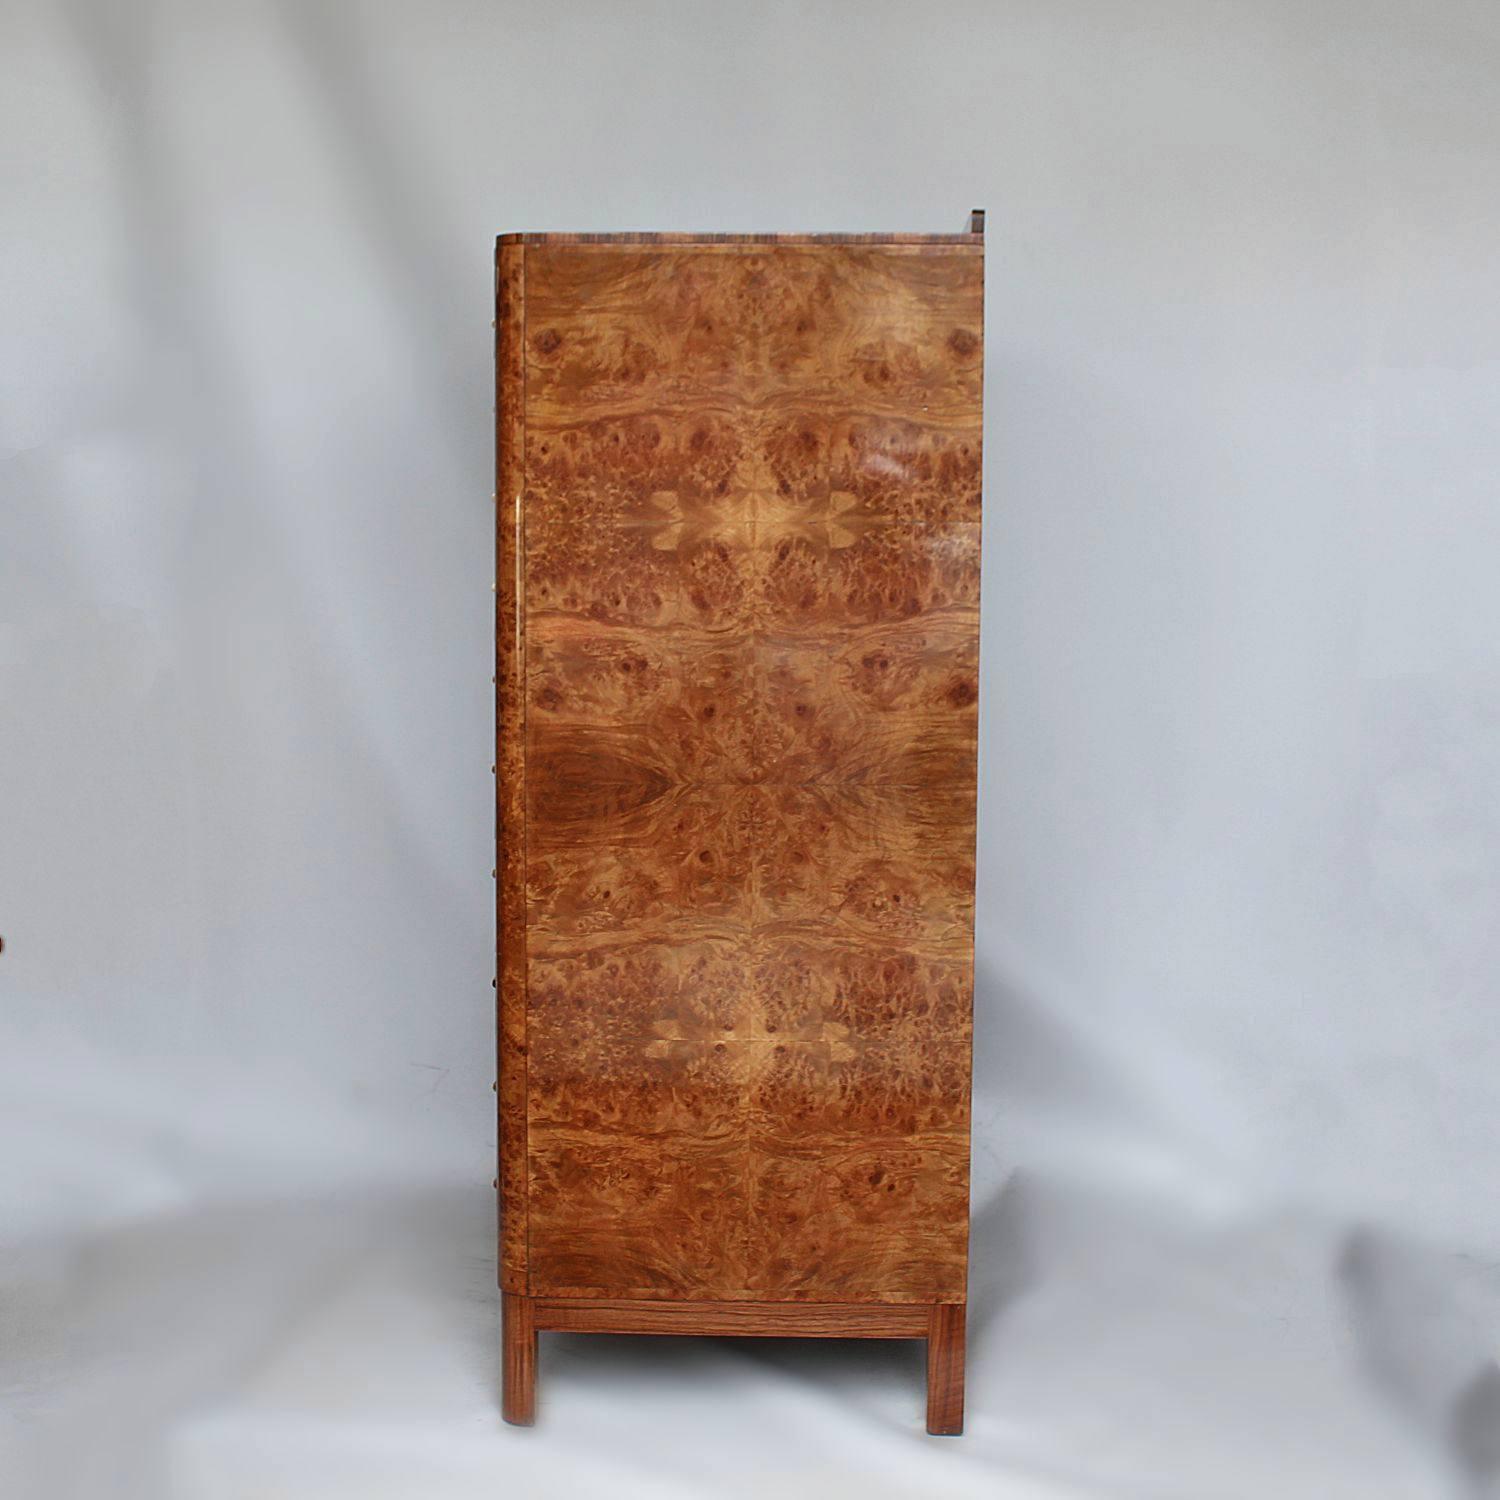 An Art Deco chest of drawers in Burr walnut with walnut fronted drawers and original metal handles. Eight integral drawers with a drop down hidden shelf to bottom.

Dimensions: H 131cm, W 79cm, D 52.5cm.

   